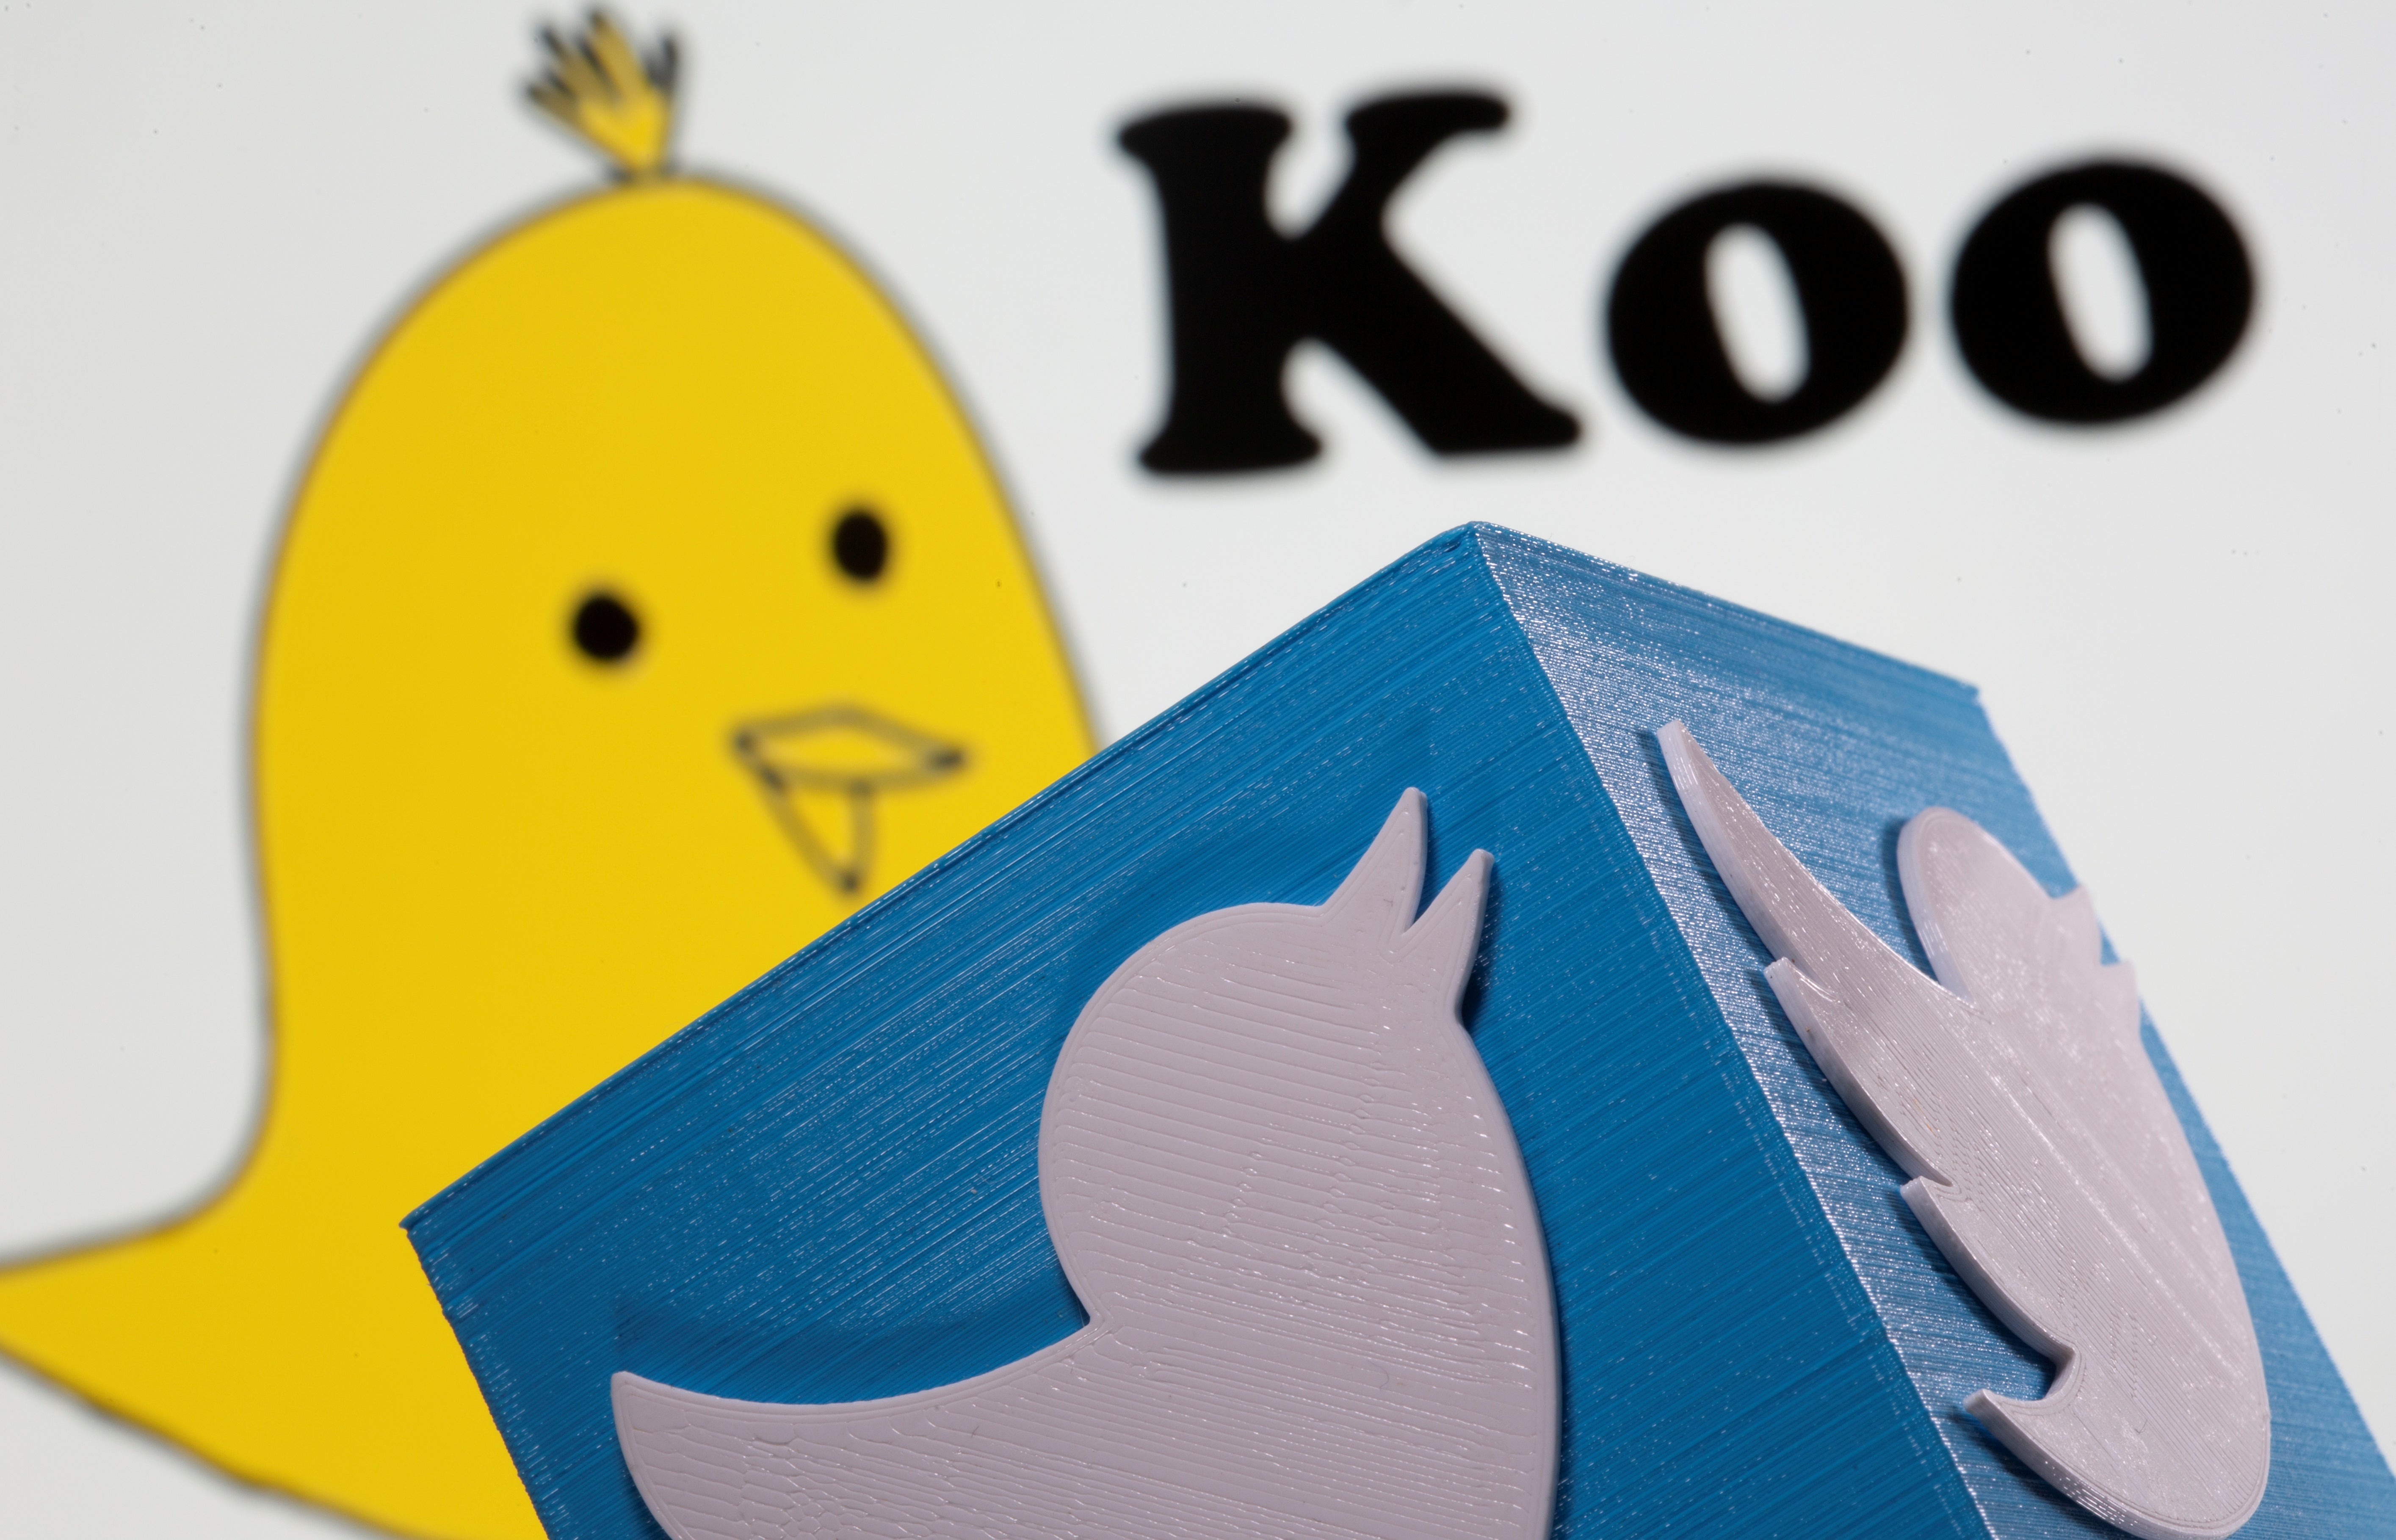 <p>A 3d printed Twitter logo is seen in front of the Koo app's logo</p>